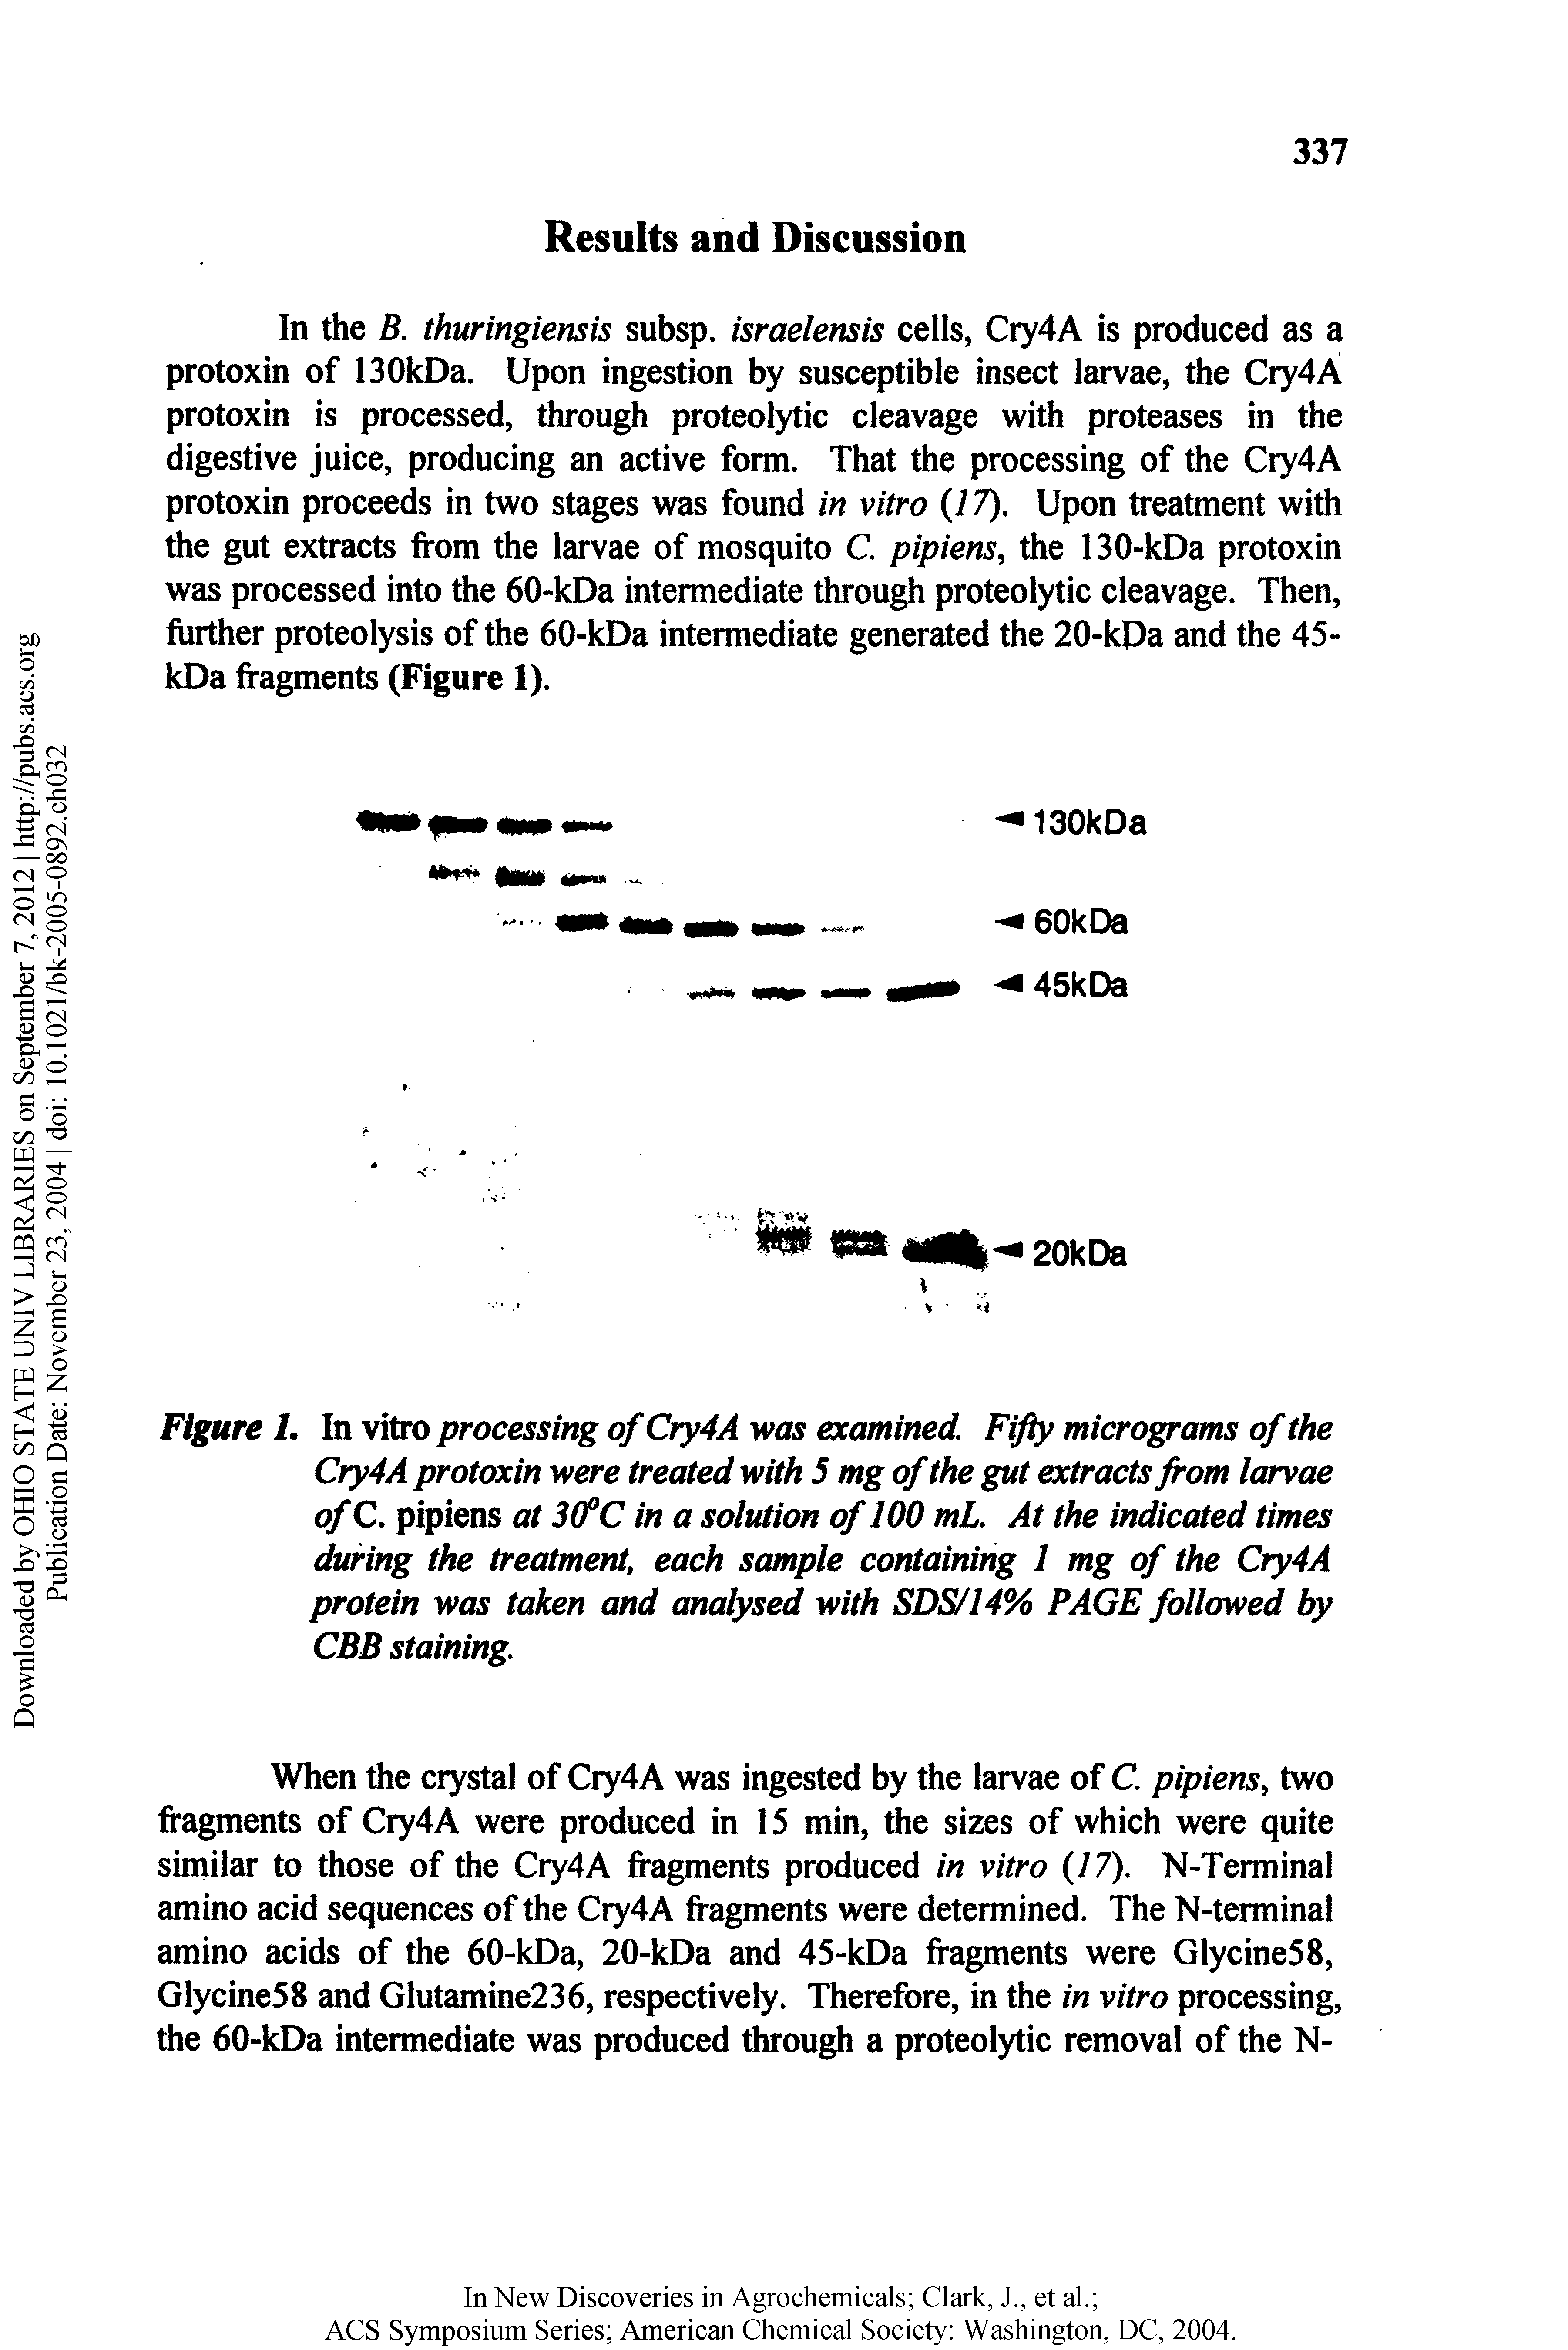 Figure I. In vitro processing of Cry4A was examined. Fifty micrograms of the Cry4A protoxin were treated with 5 mg of the gut extracts from larvae of C. pipiens at 3(fC in a solution of 100 ml. At the indicated times during the treatment, each sample containing 1 mg of the Cry4A protein was taken and analysed with SDS/14% PAGE followed by CBB staining.